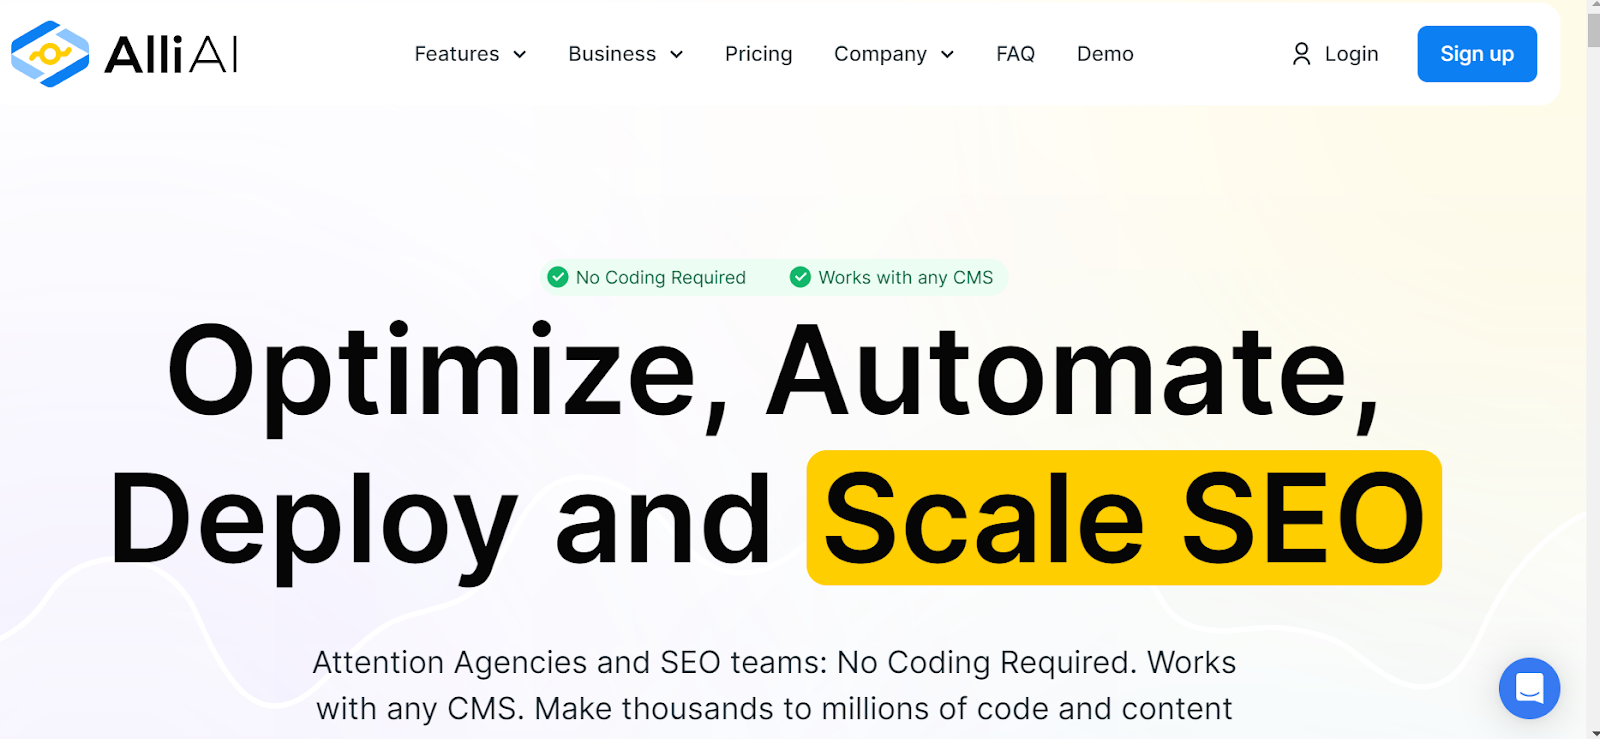 Tools for SEO automation